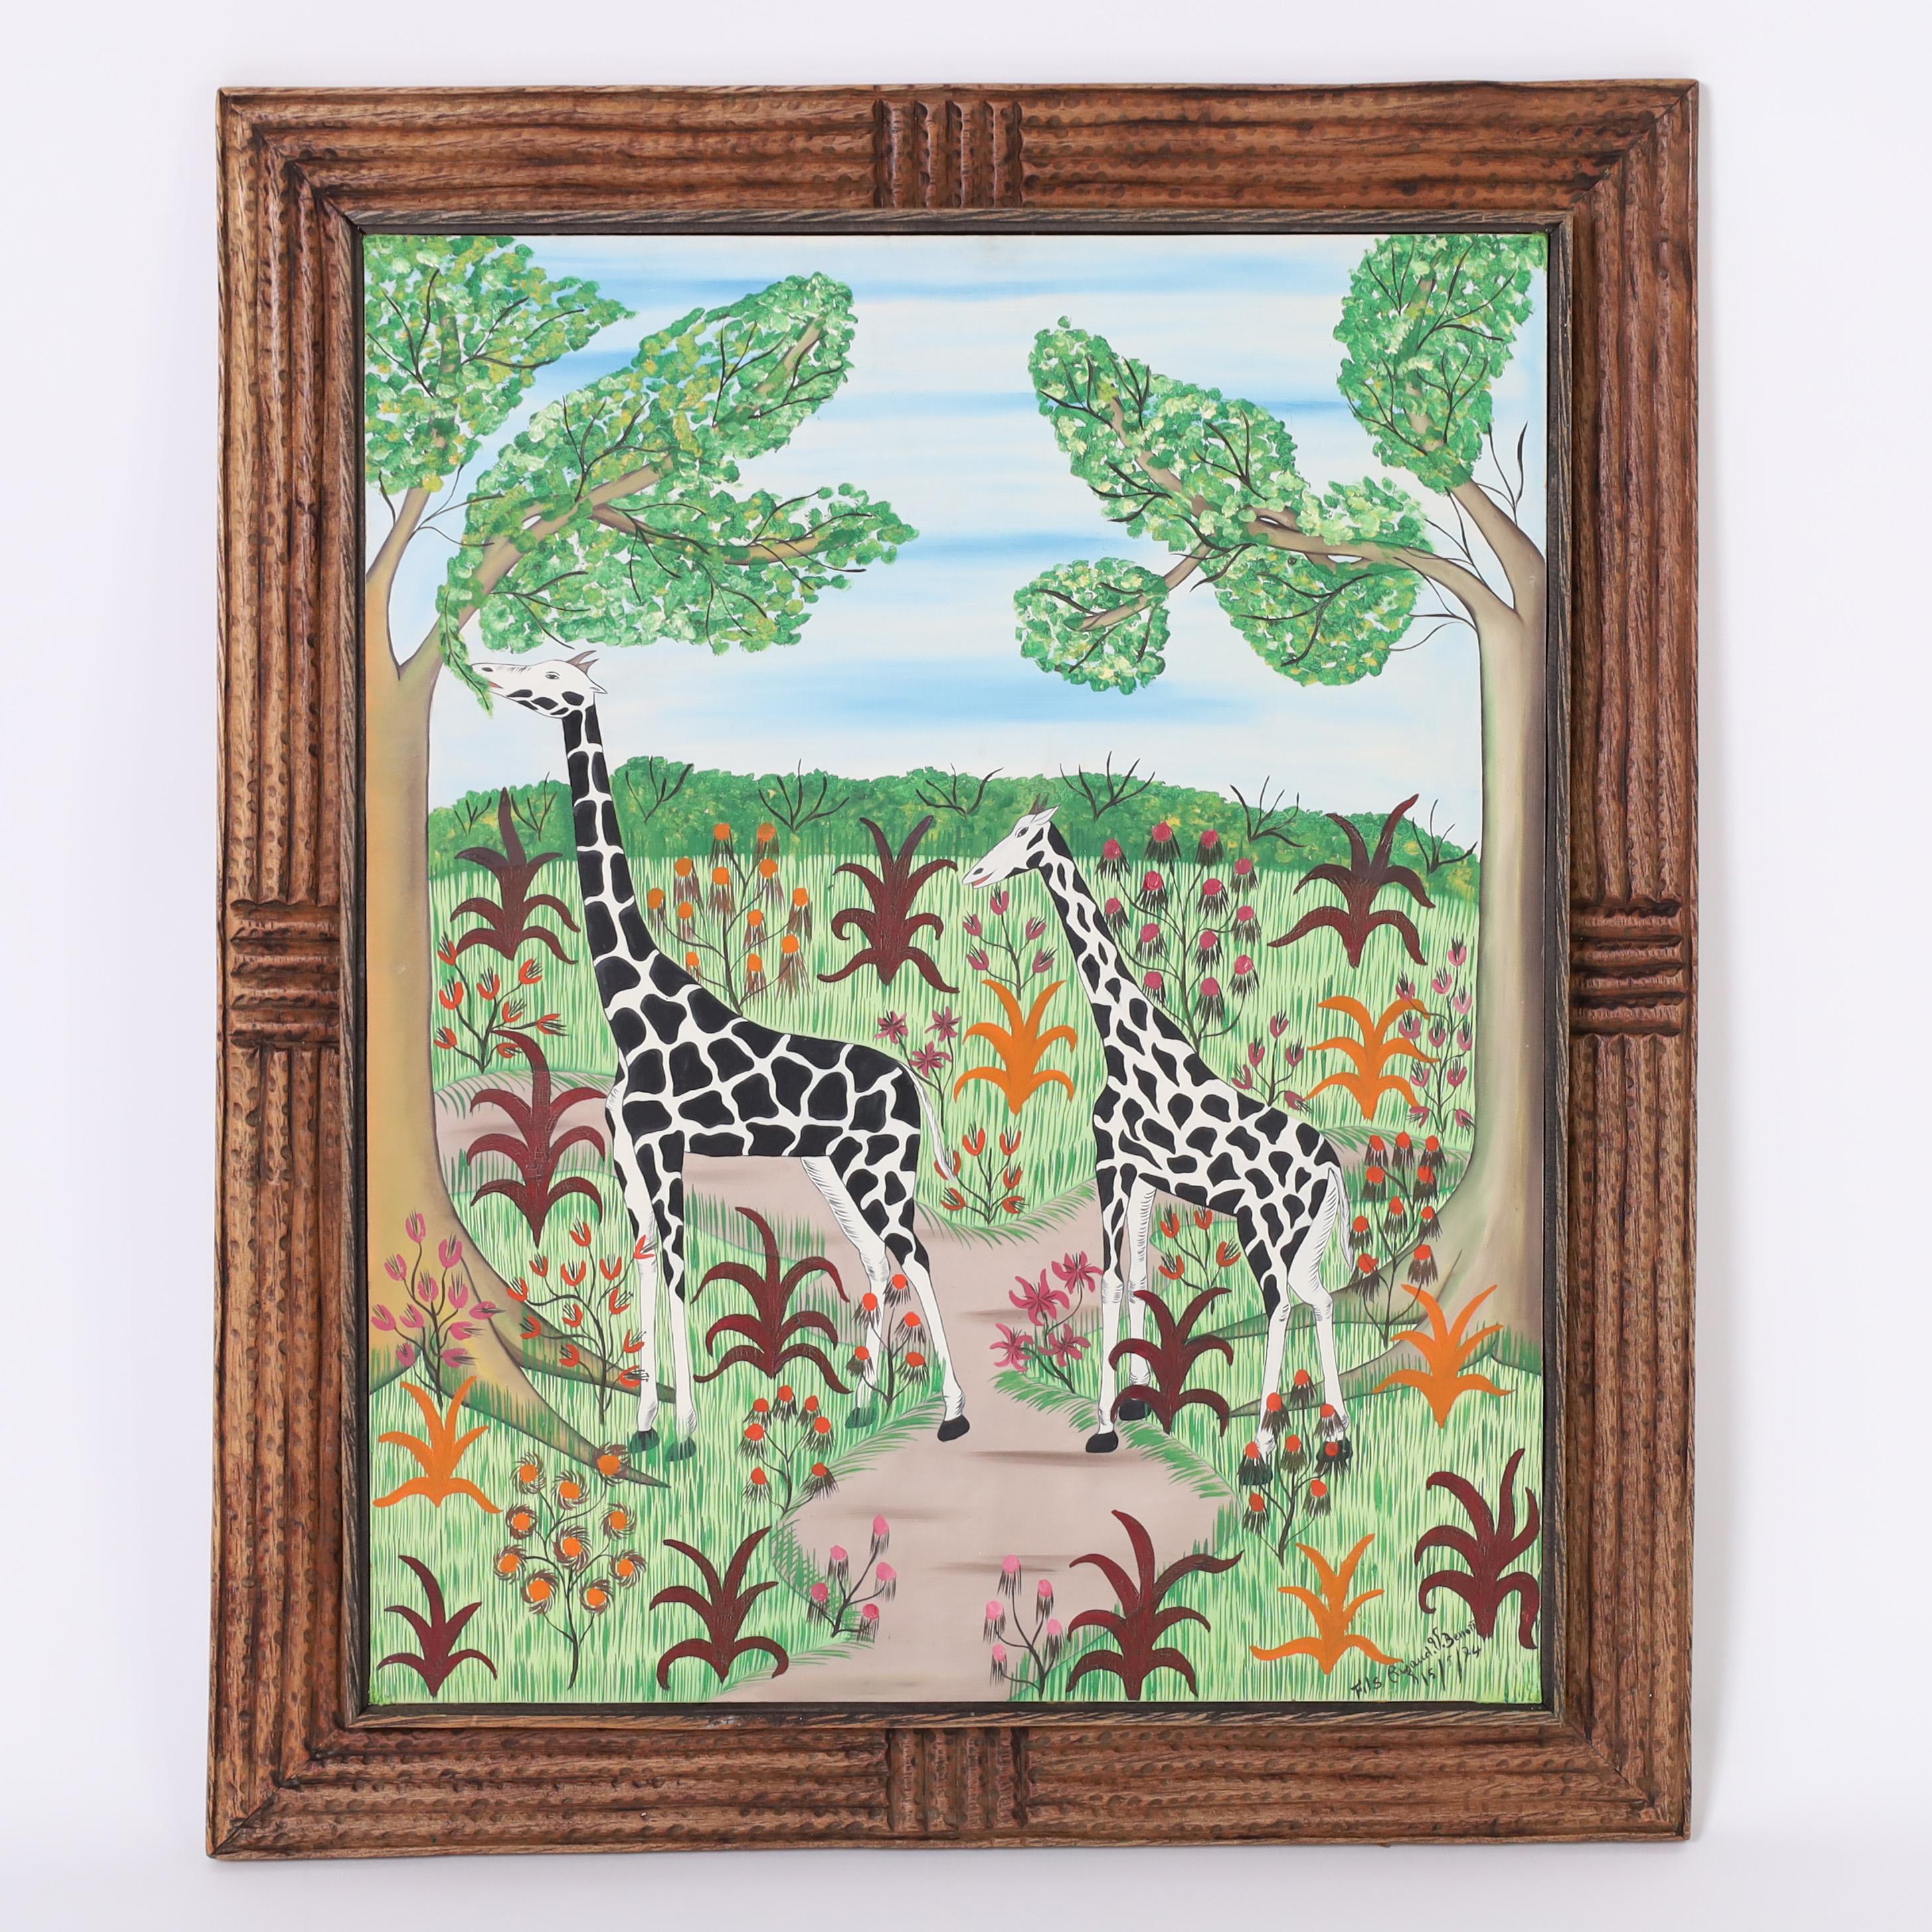 Unknown Animal Painting - Haitian Painting of Giraffes